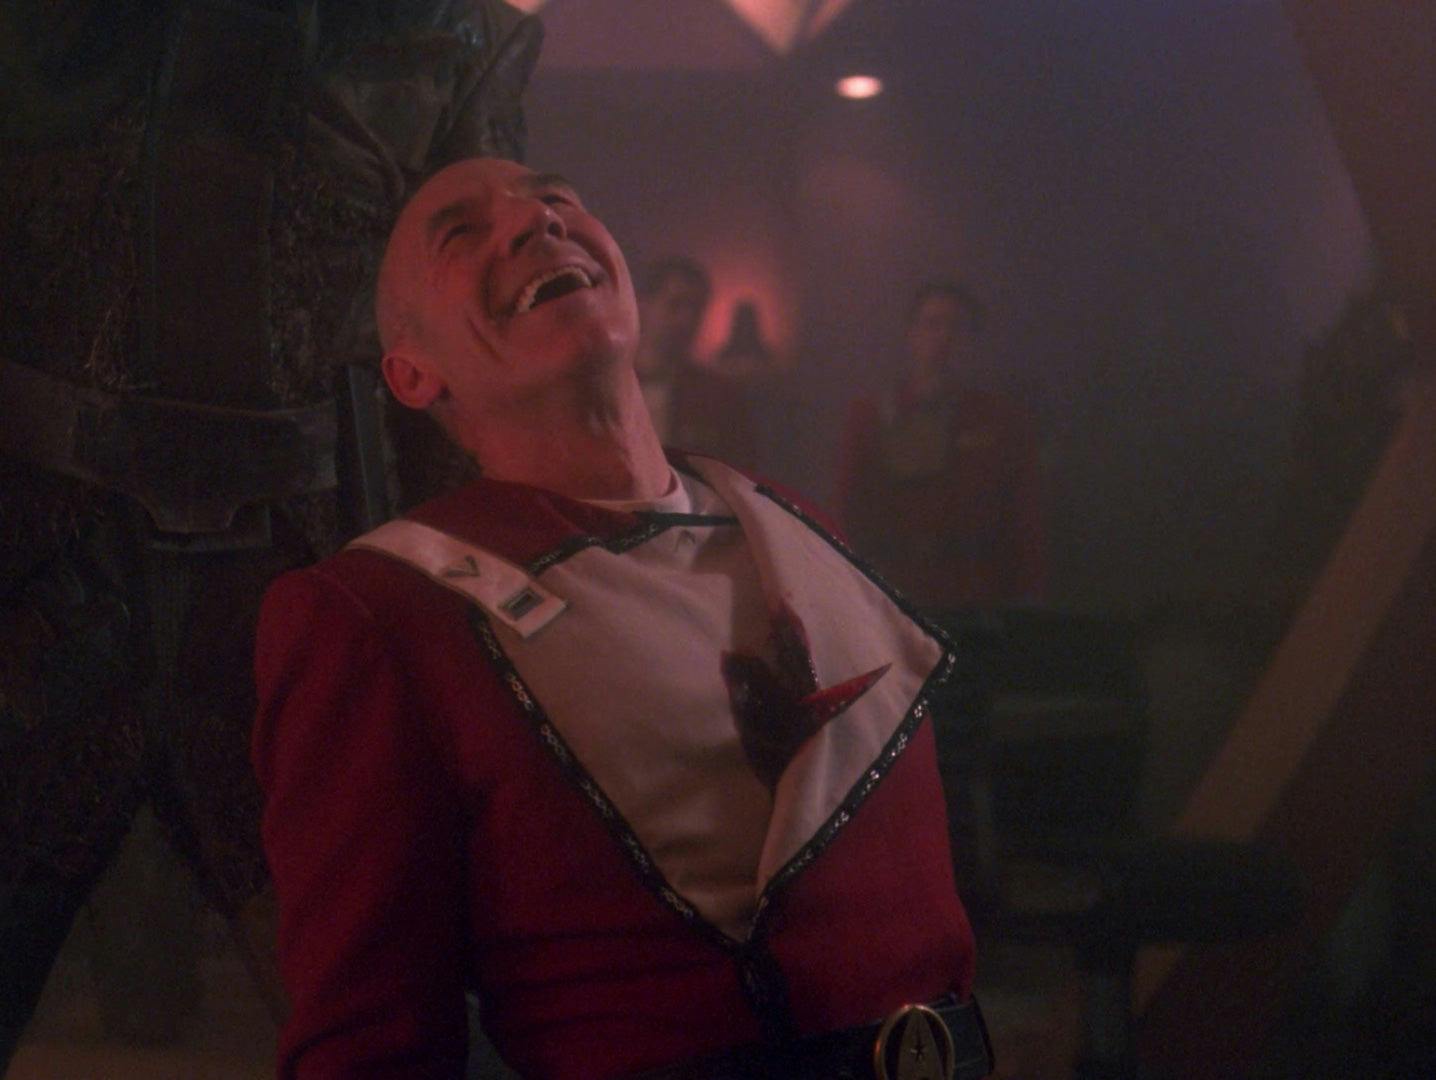 A young cadet Picard is impaled through his heart in Star Trek: The Next Generation